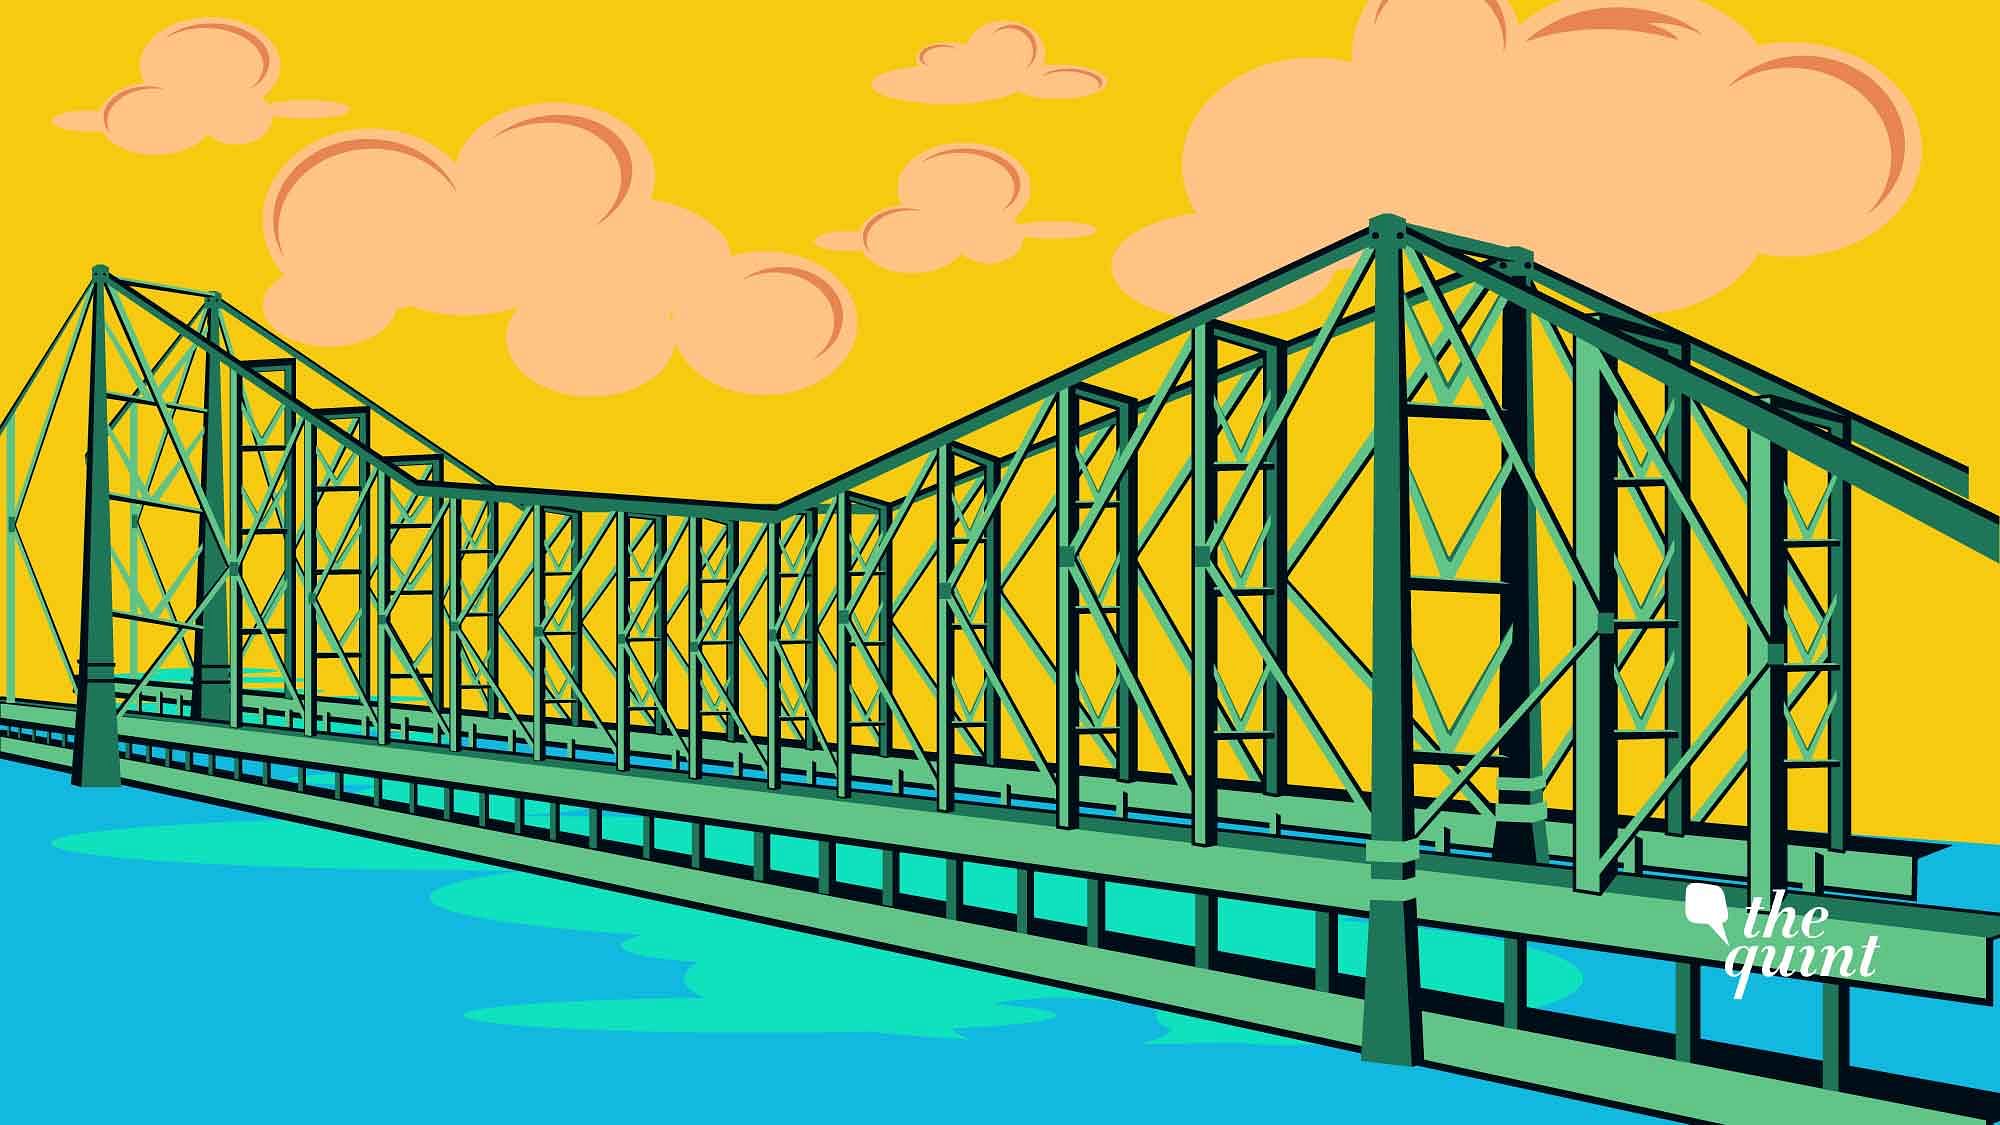 Over the years, the Howrah Bridge has become synonymous with the city of Kolkata.